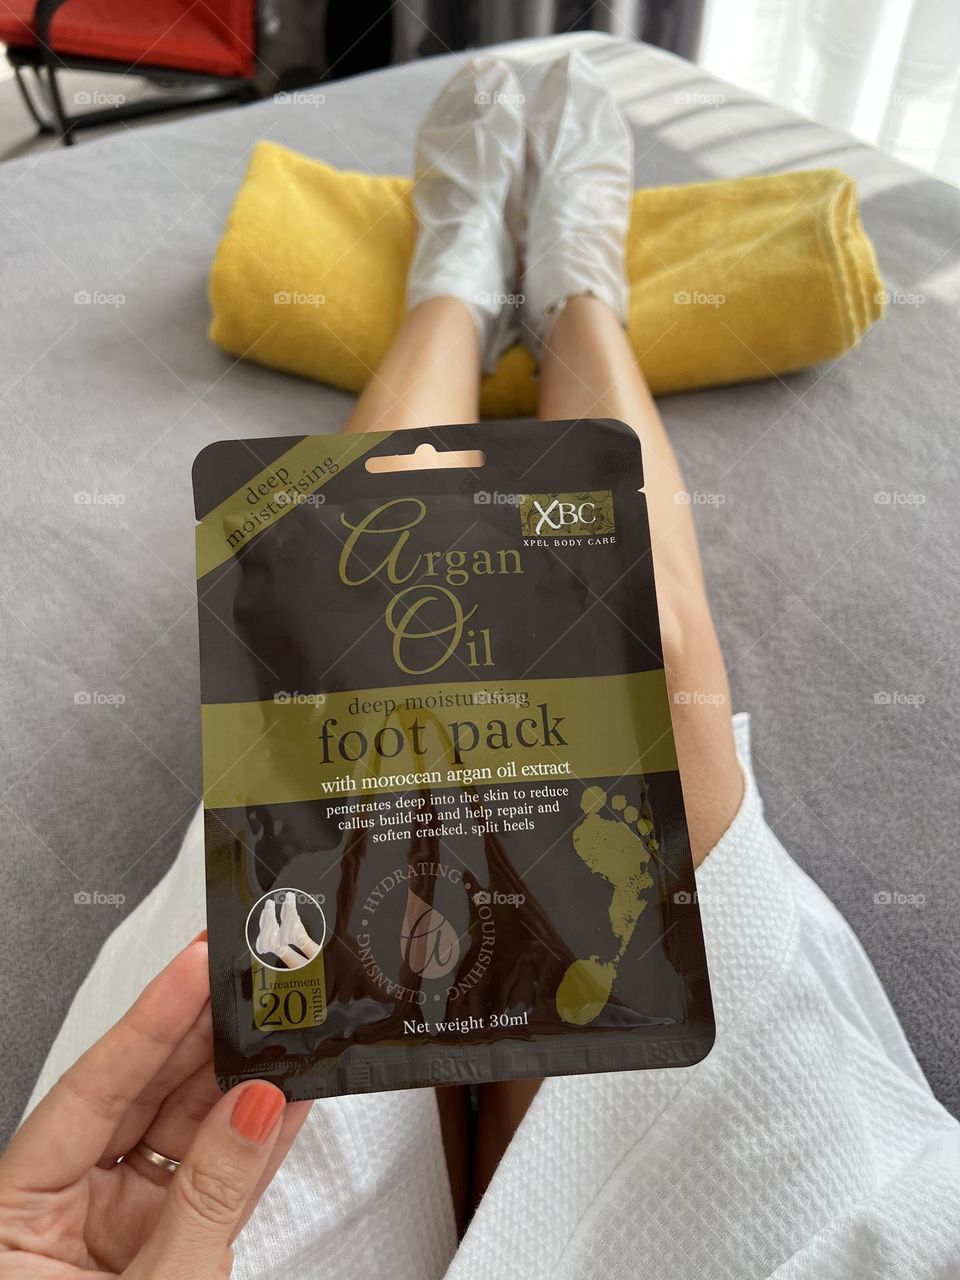 Deep moisturising Argan Oil foot pack with Moroccan argan oil extract. Penetrates deep into the skin to reduce callus buildup and help repair and soften cracked, split heels. Love this beauty product for foot home treatment .